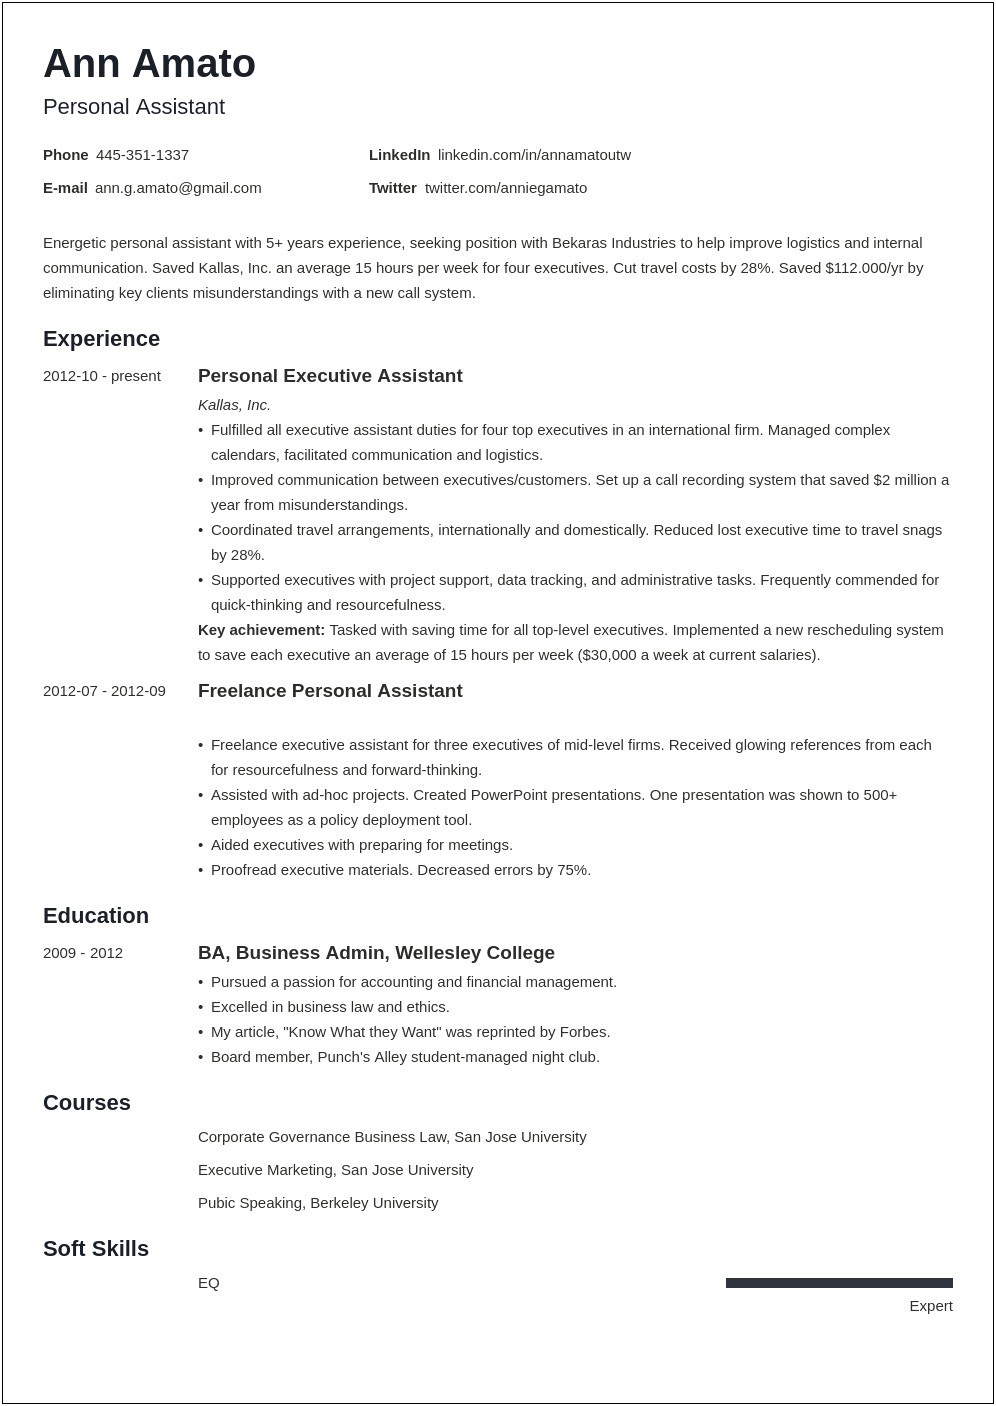 Work Experience Or Working Experience In Resume